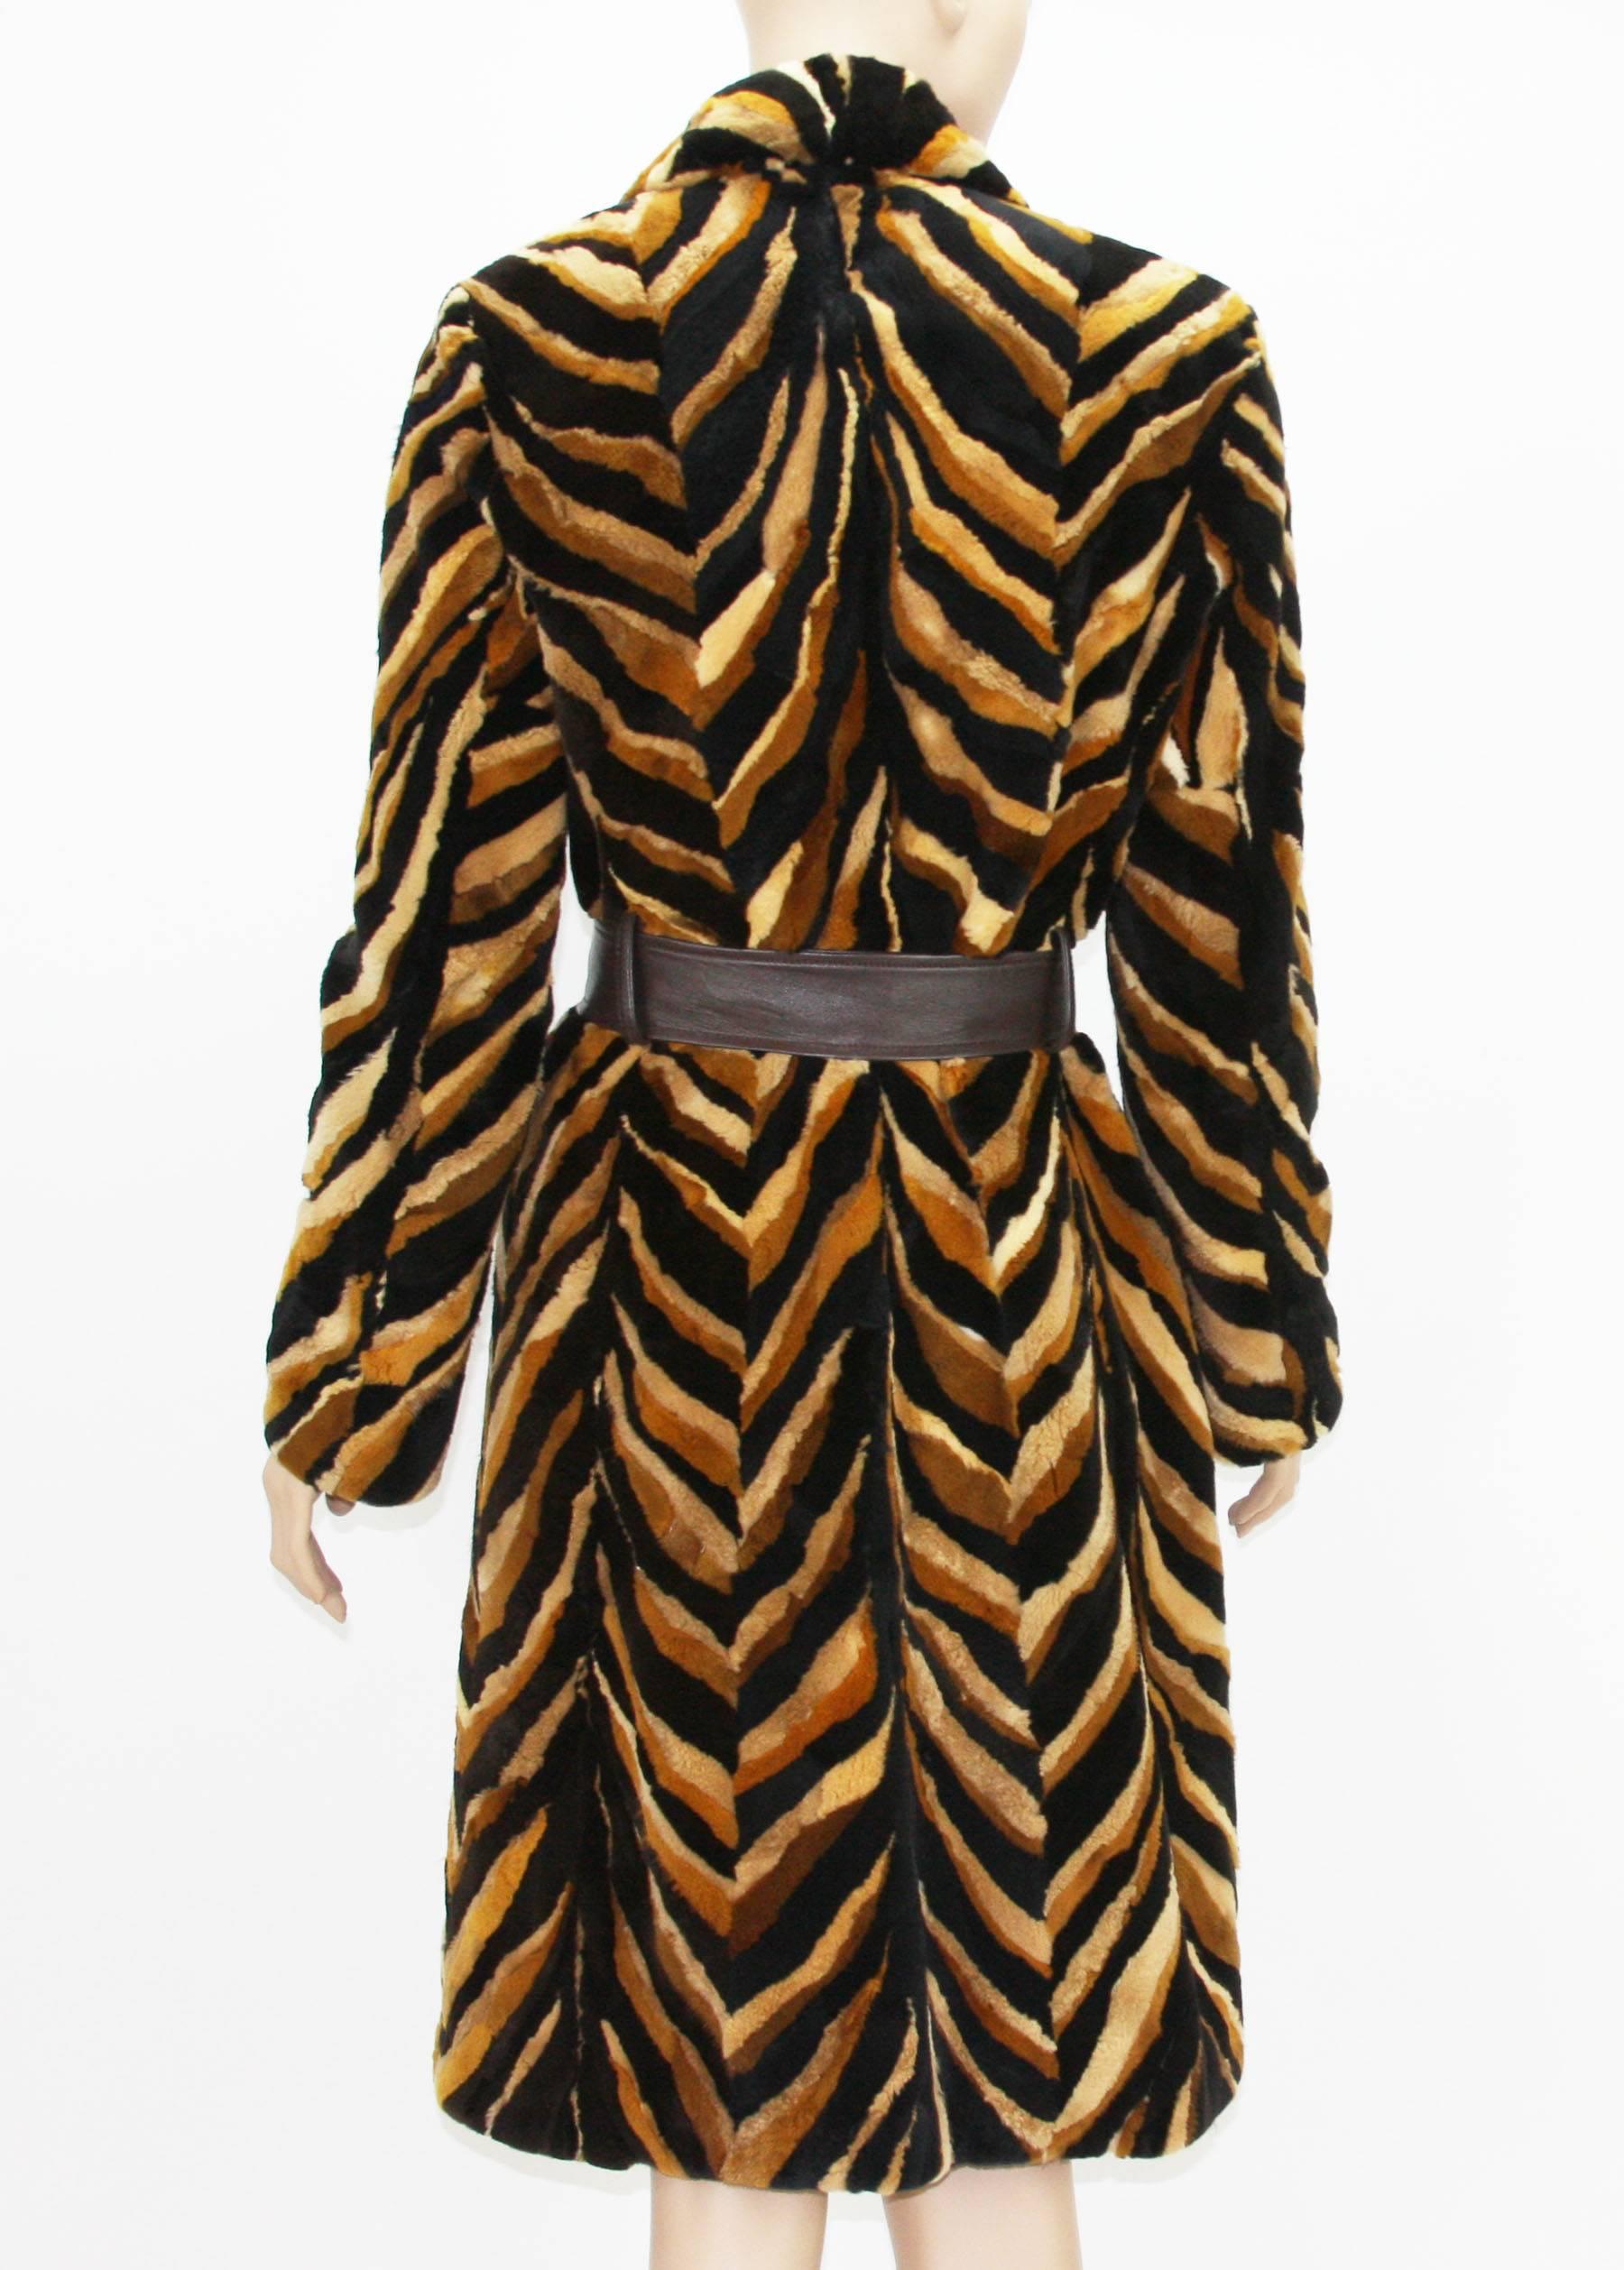 Intricately detailed coat constructed with different shades of mink (black, browns, tan) forming a large chevron pattern.
Vintage Gianni Versace Couture Sheared Mink Belted Coat. Italian size - 42.
89% Mink, 11% Leather. Fully Lined in brown lining